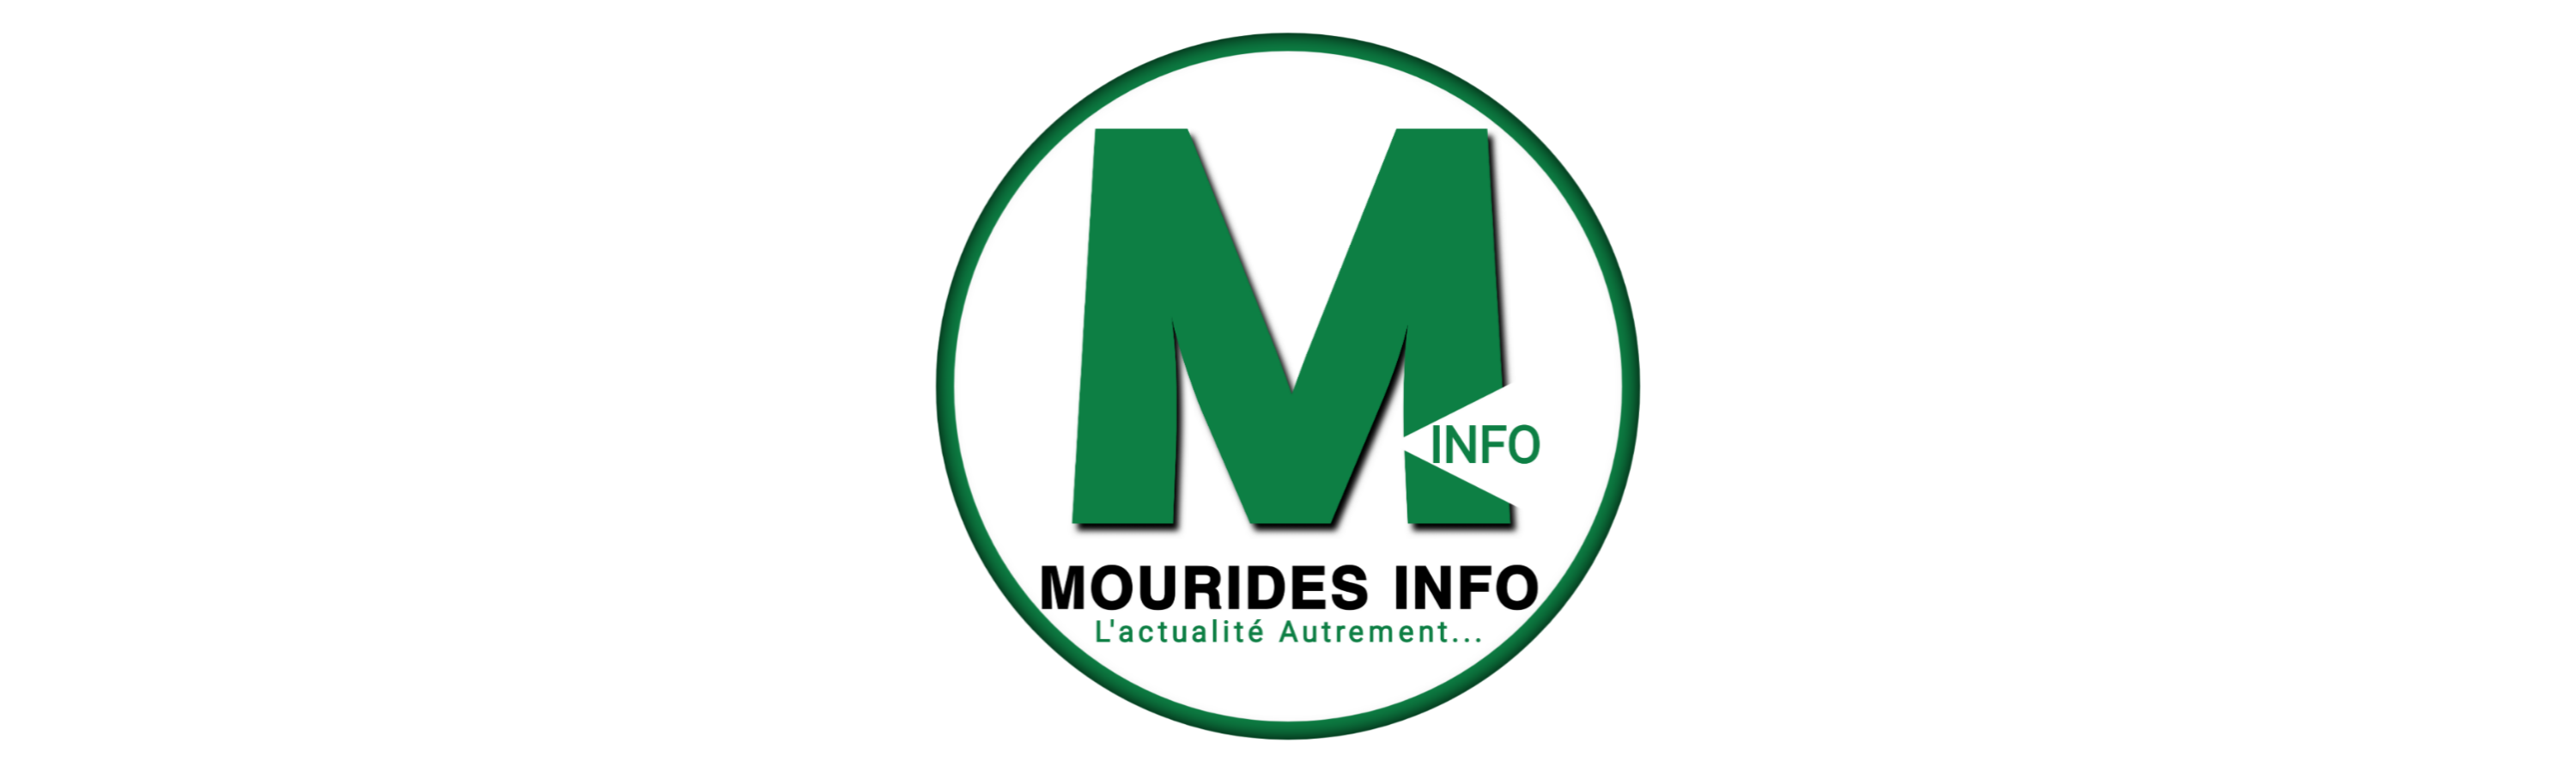 Mourides.info